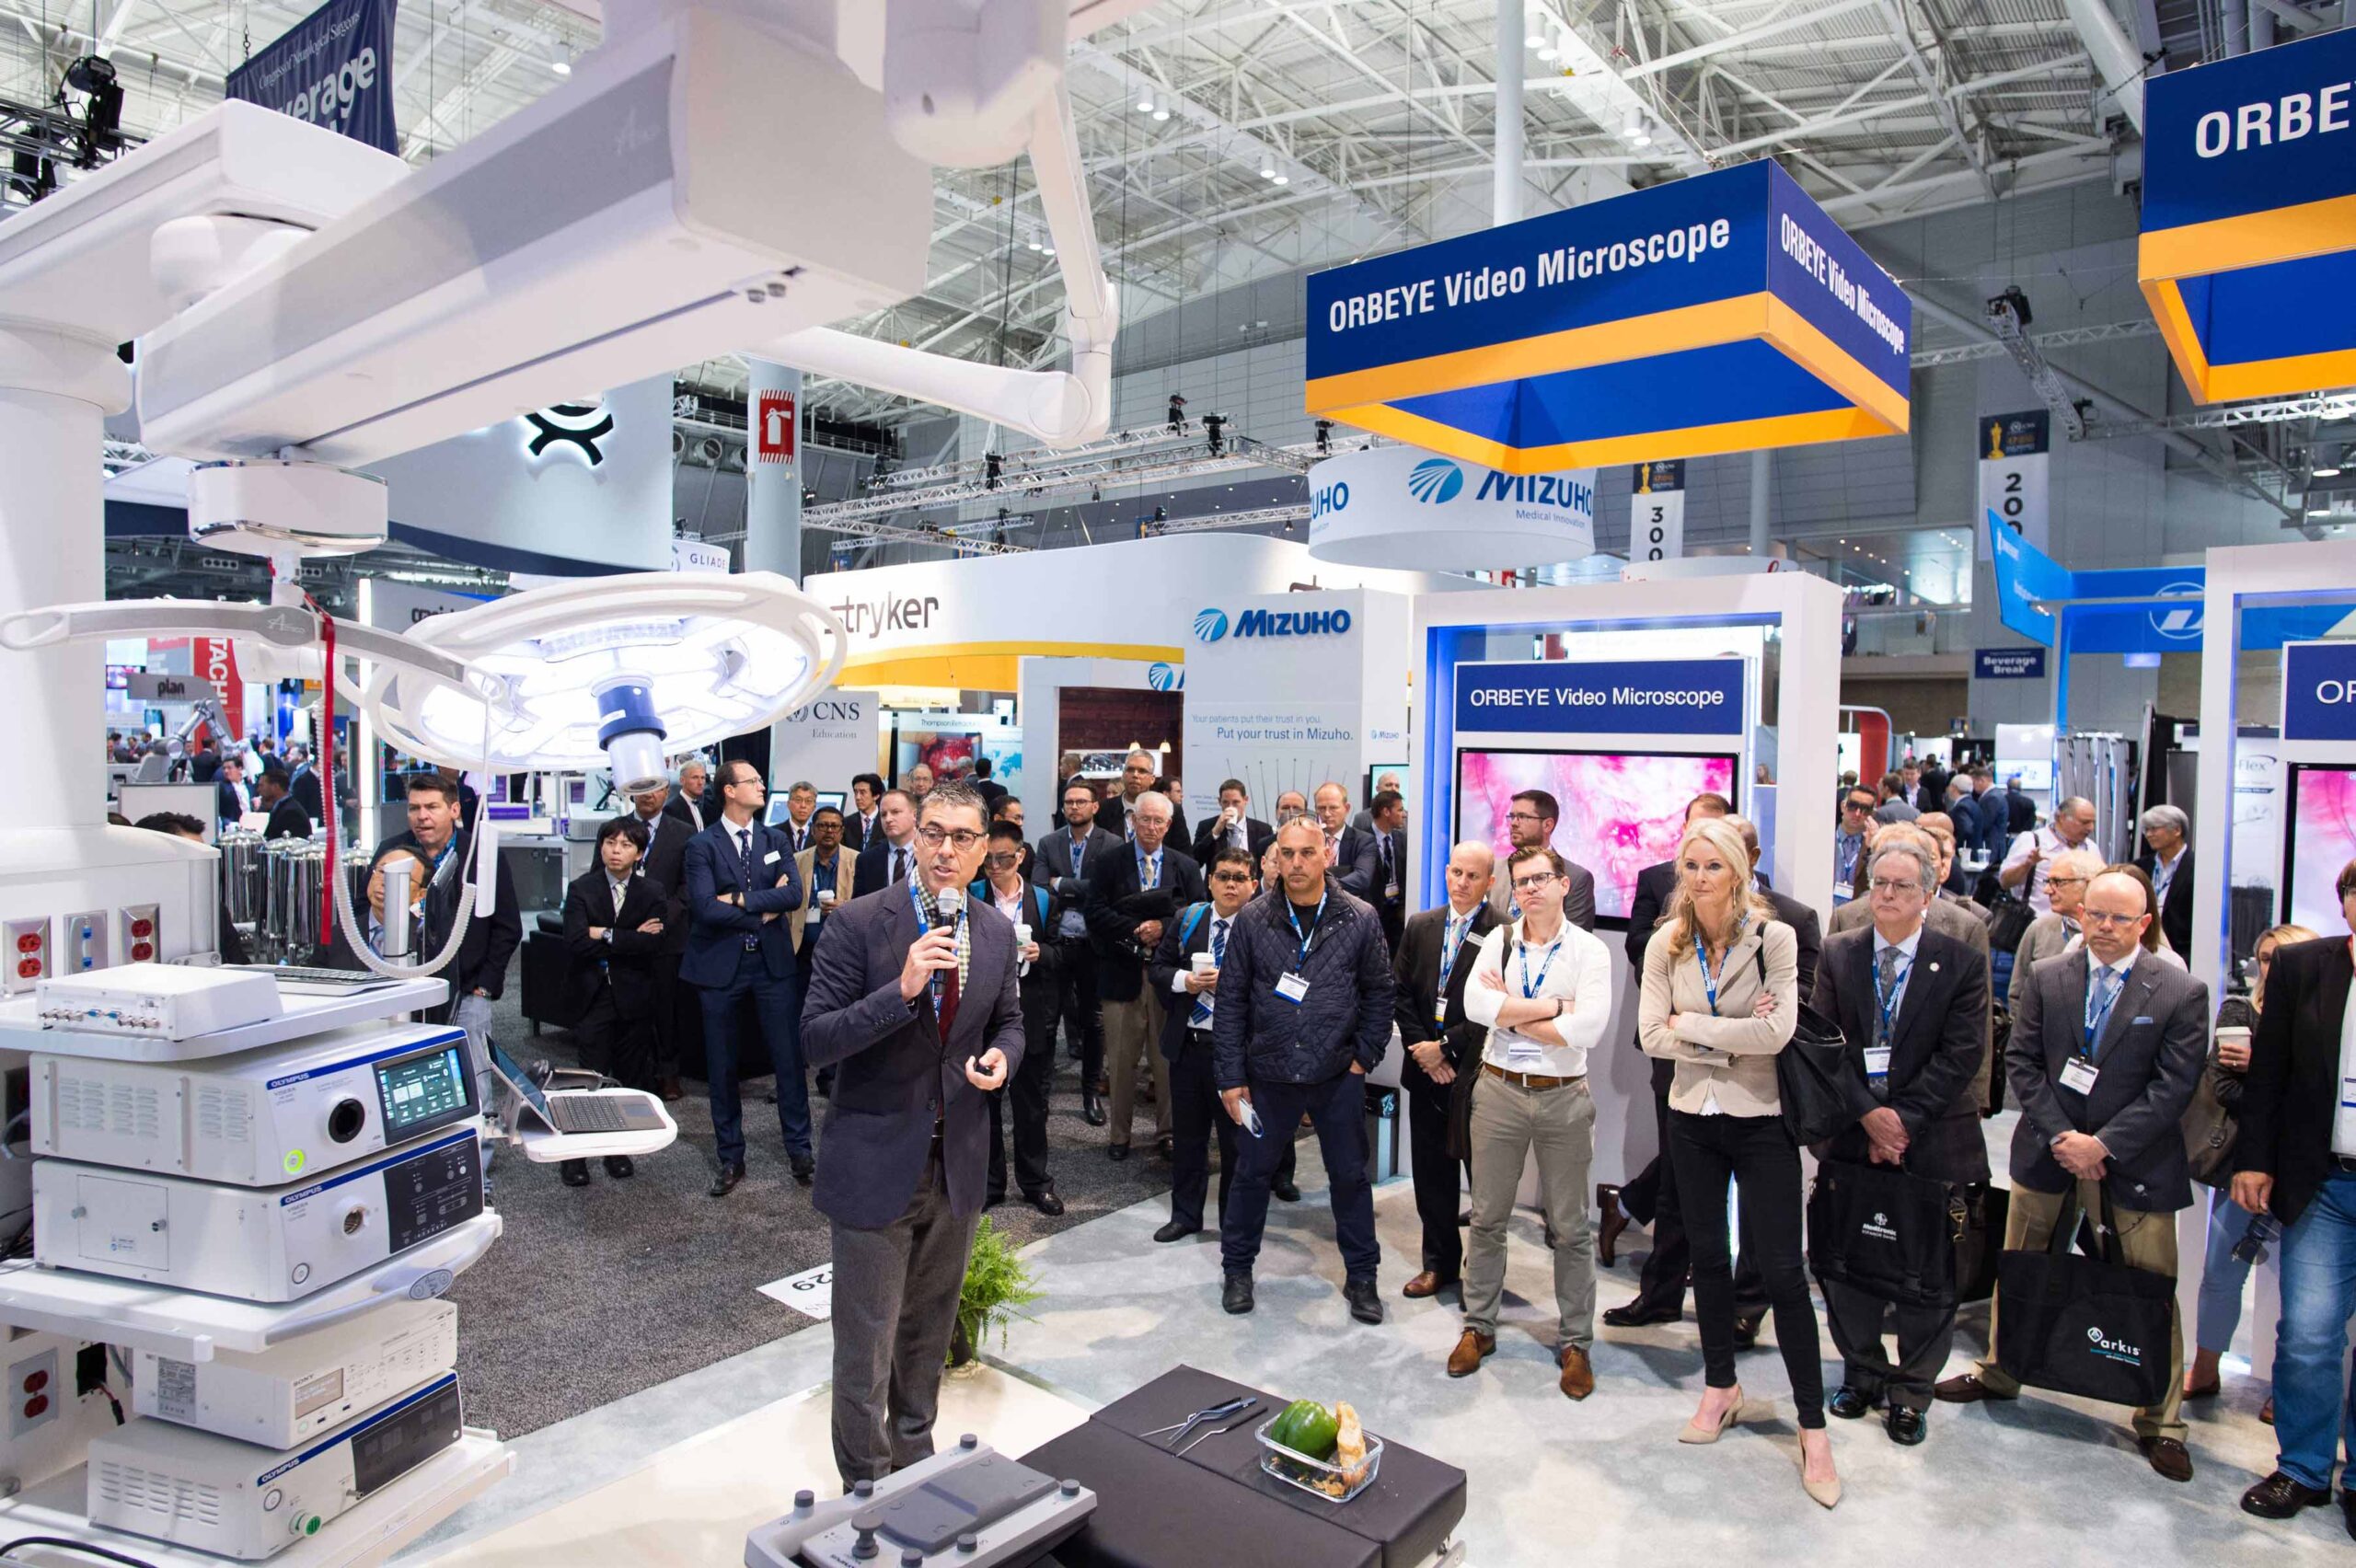 An exhibitor demonstrates a medical product at a trade show on the showroom floor as a large crowd watches.  